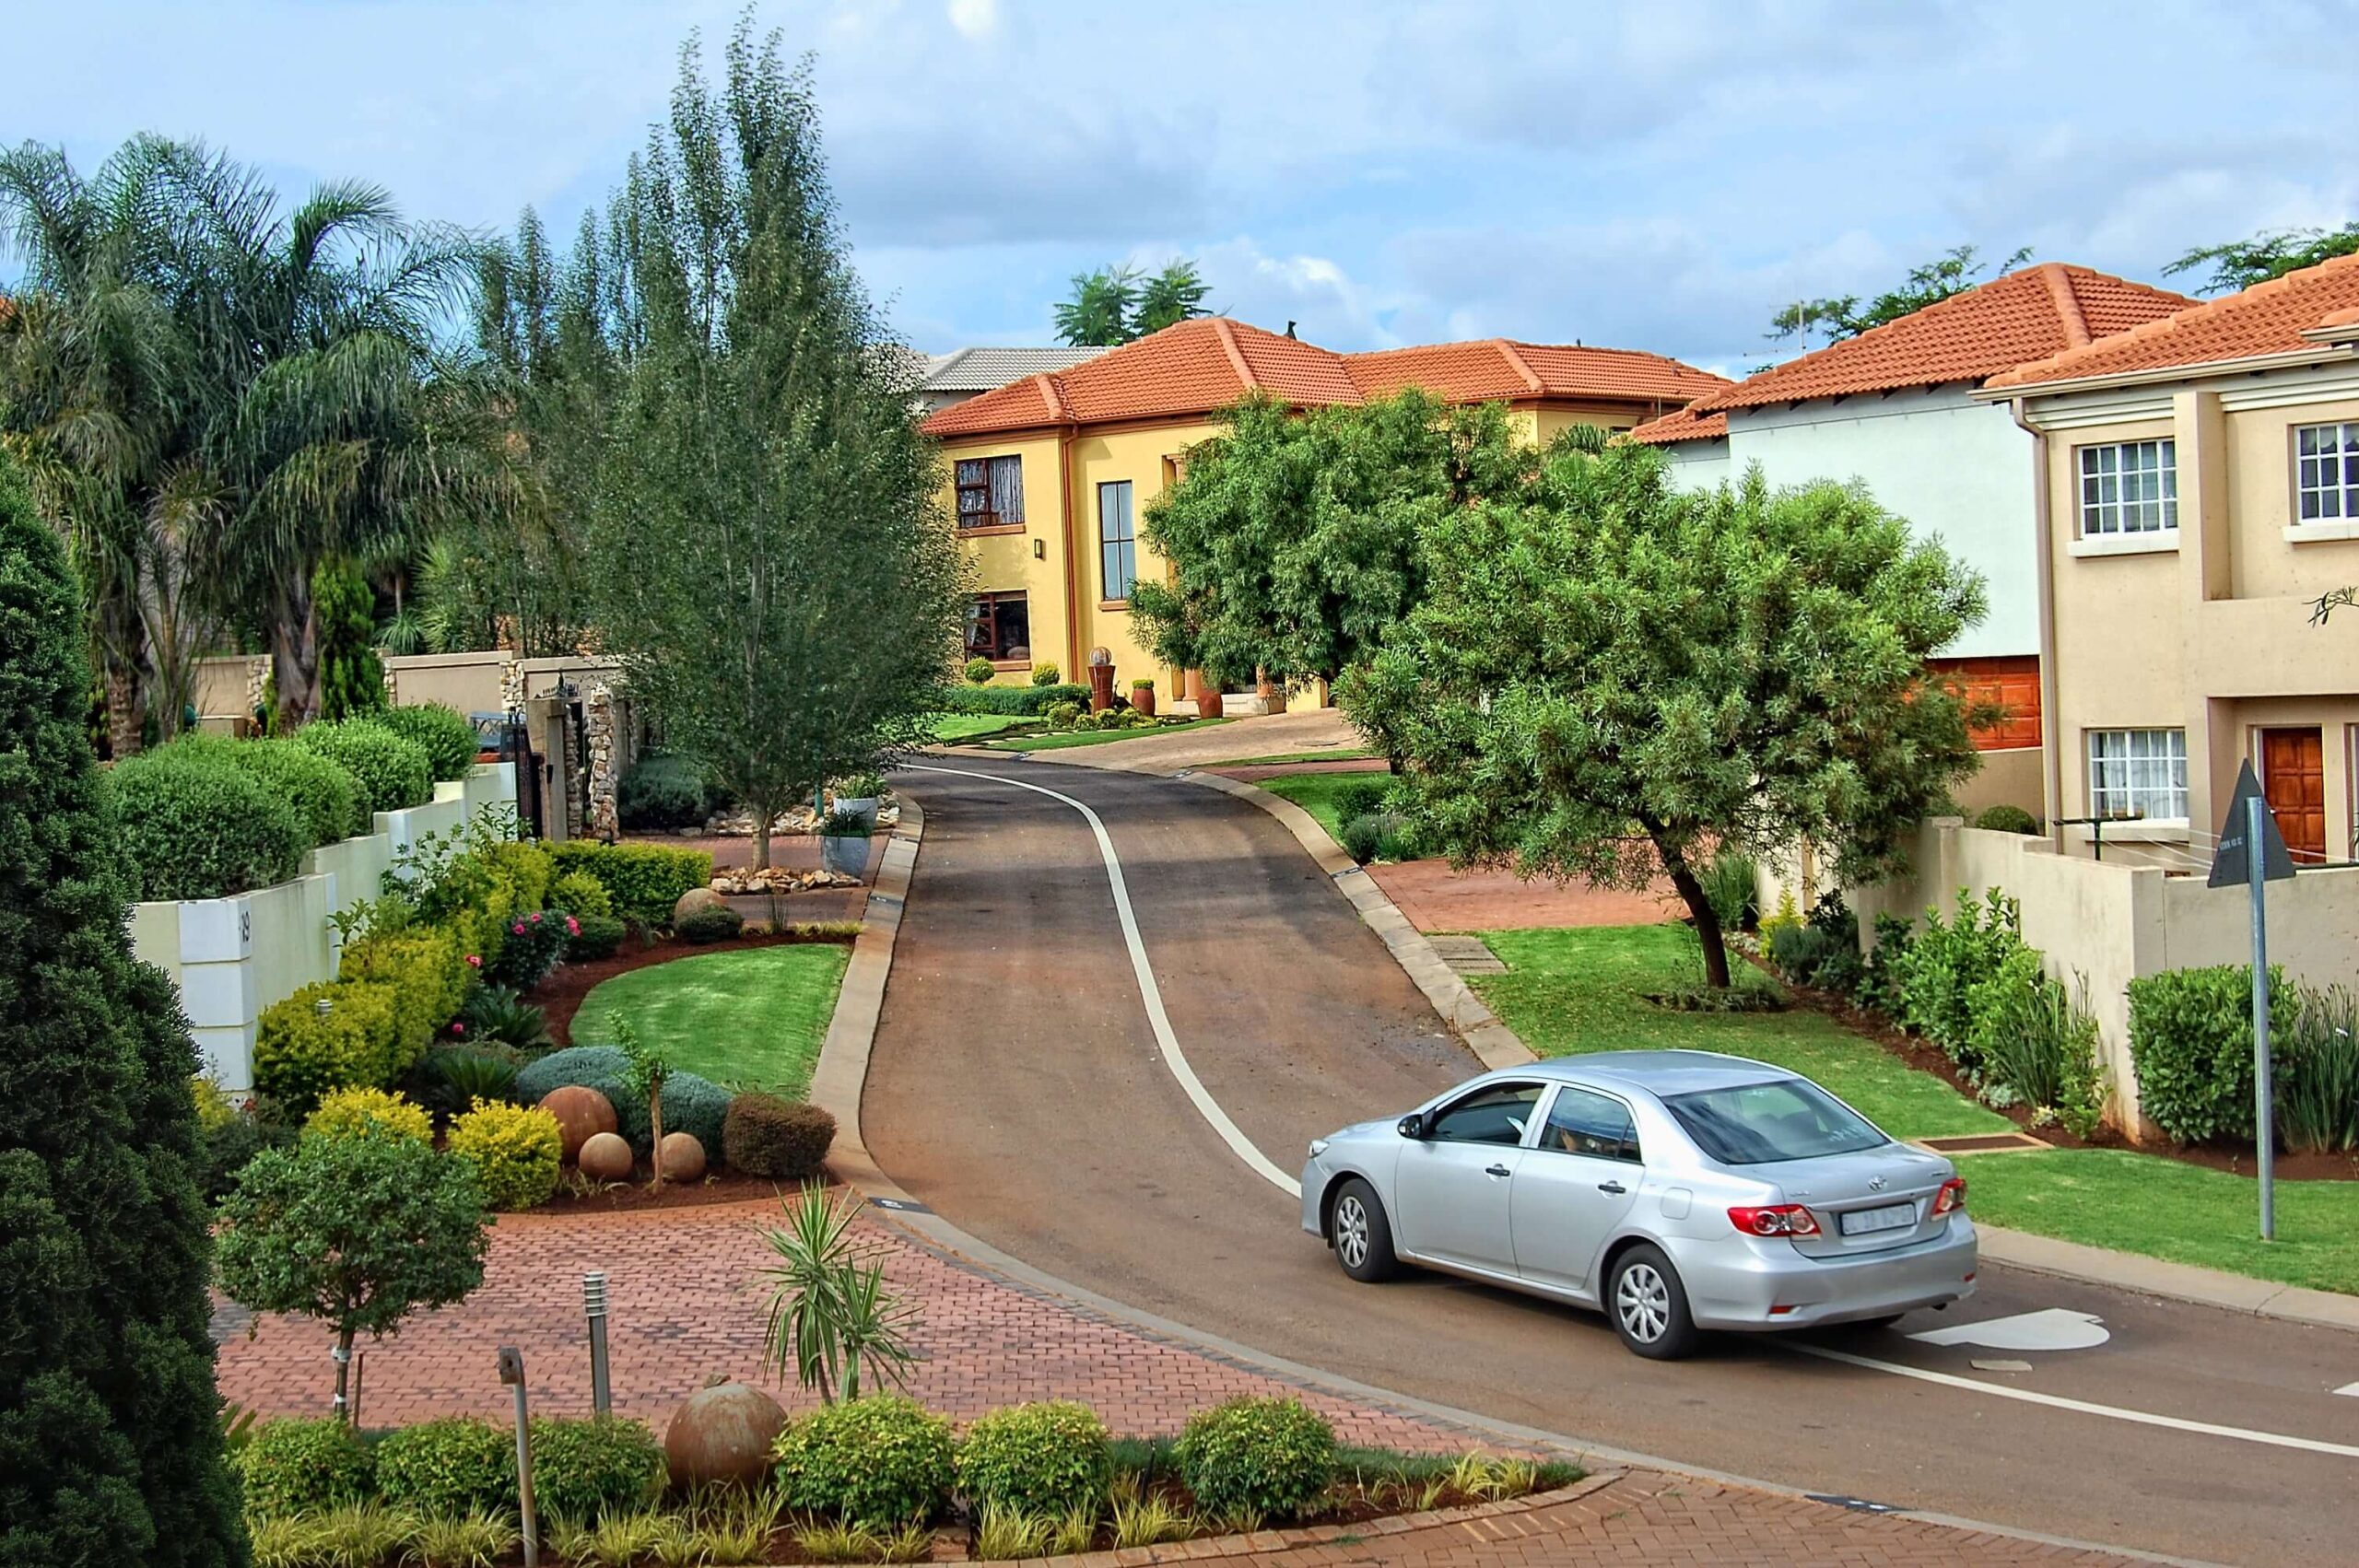 16 Steps to Understanding Community Schemes and Estate Living in South Africa